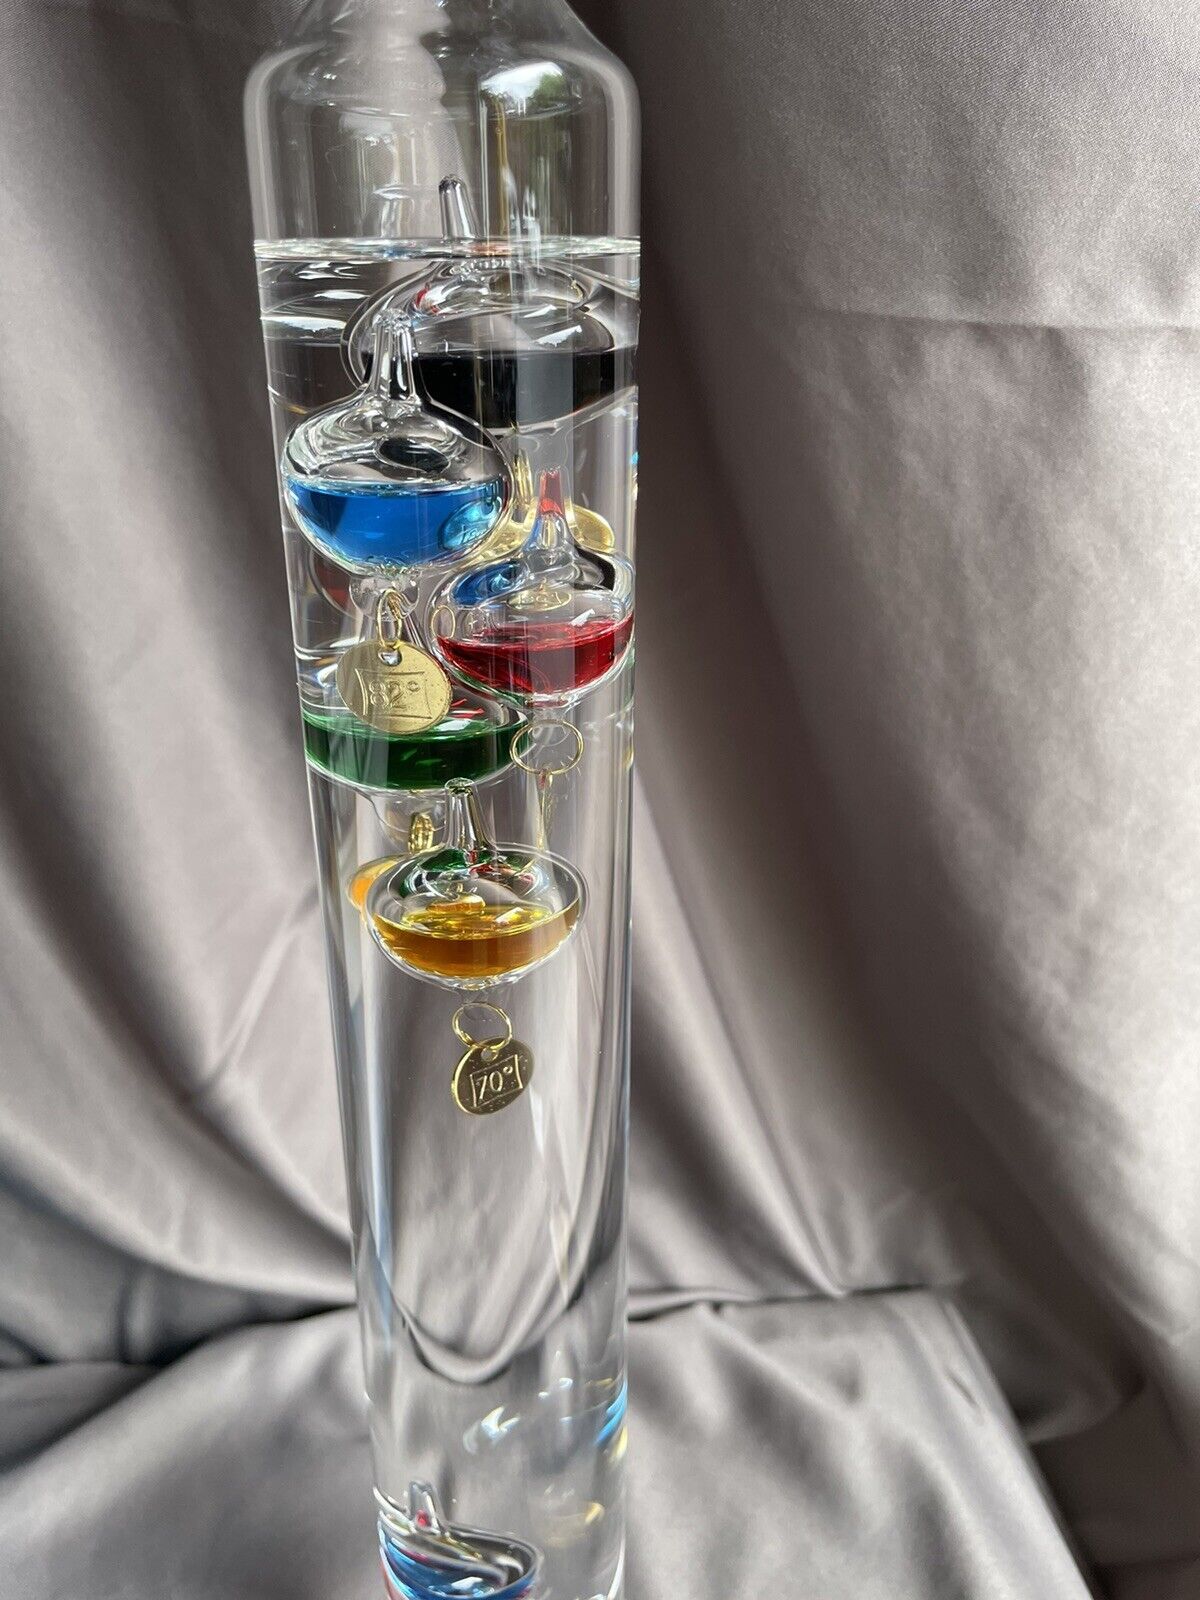 NEW OPEN BOX Galileo Thermometer Glass Brass Orb Floating Glass Bubbles 15”